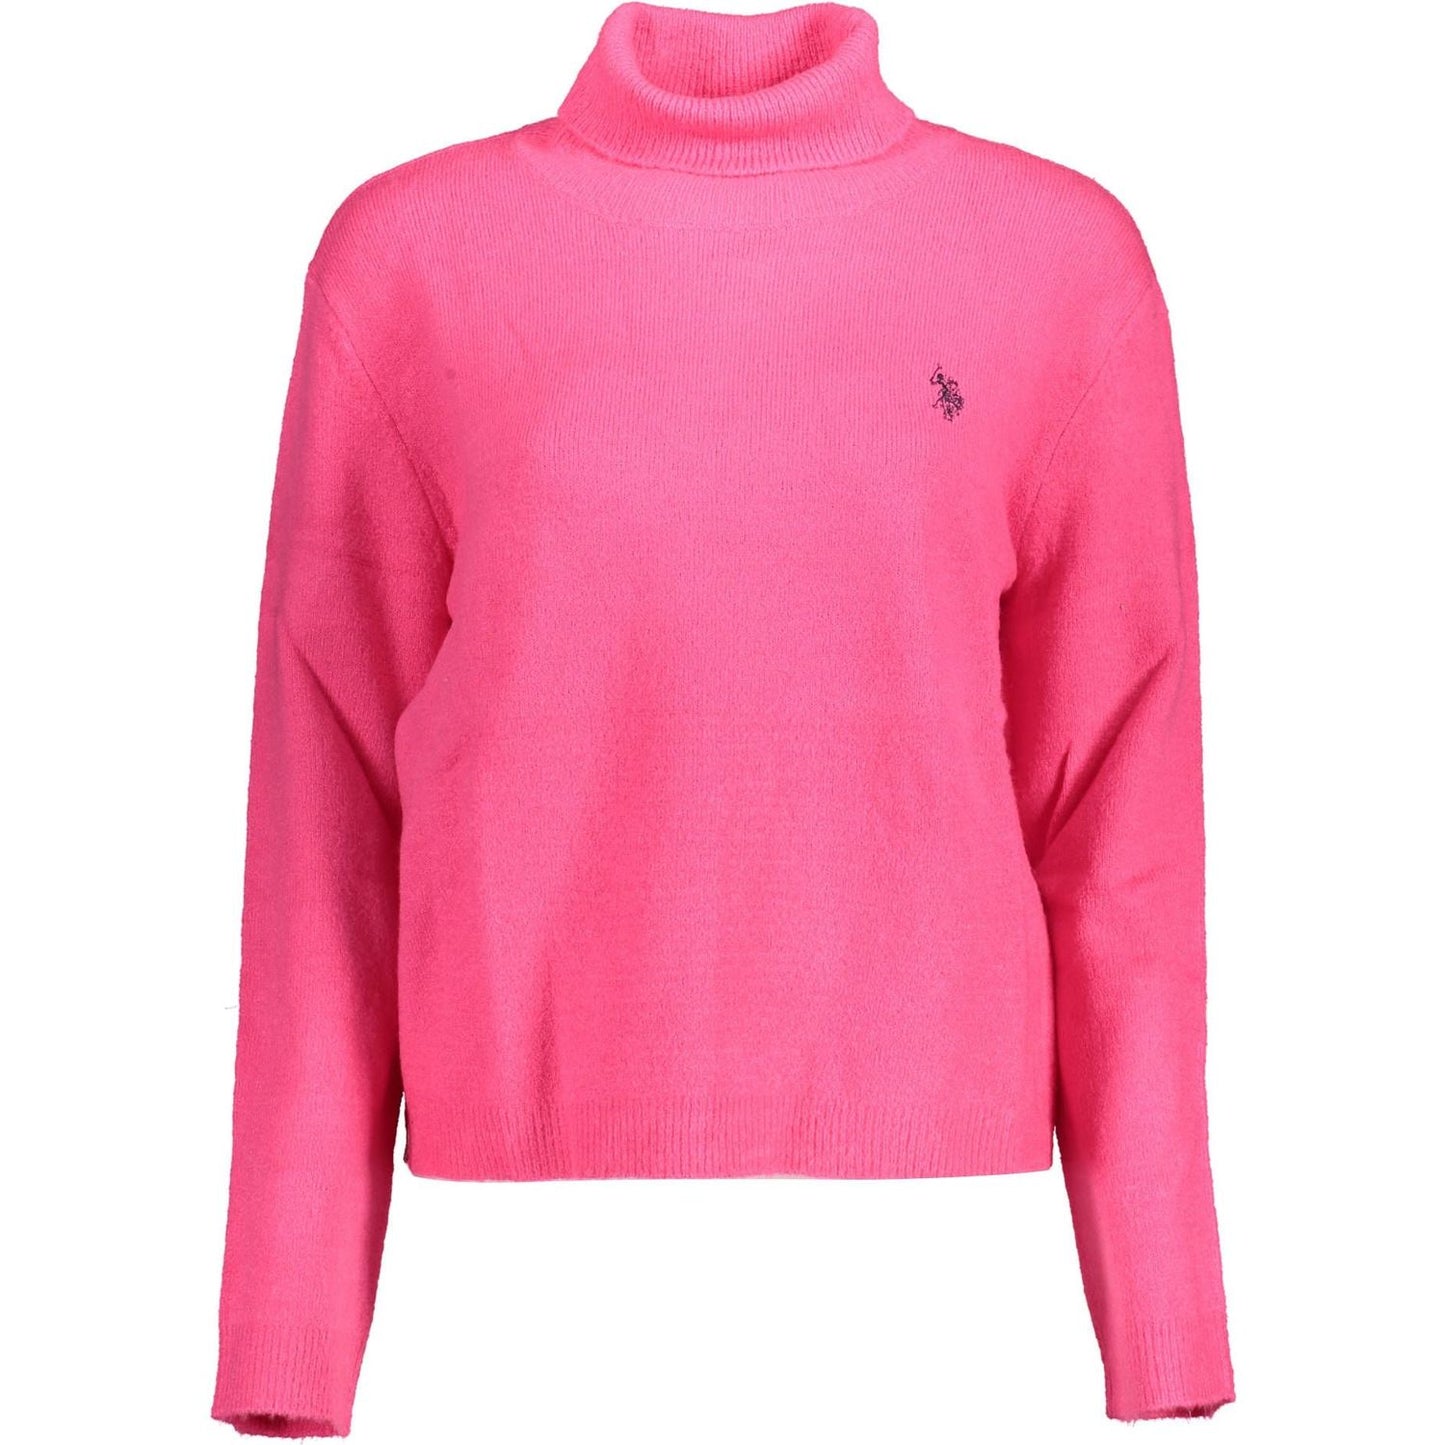 U.S. POLO ASSN. Chic Turtleneck Sweater with Elegant Embroidery chic-turtleneck-sweater-with-elegant-embroidery